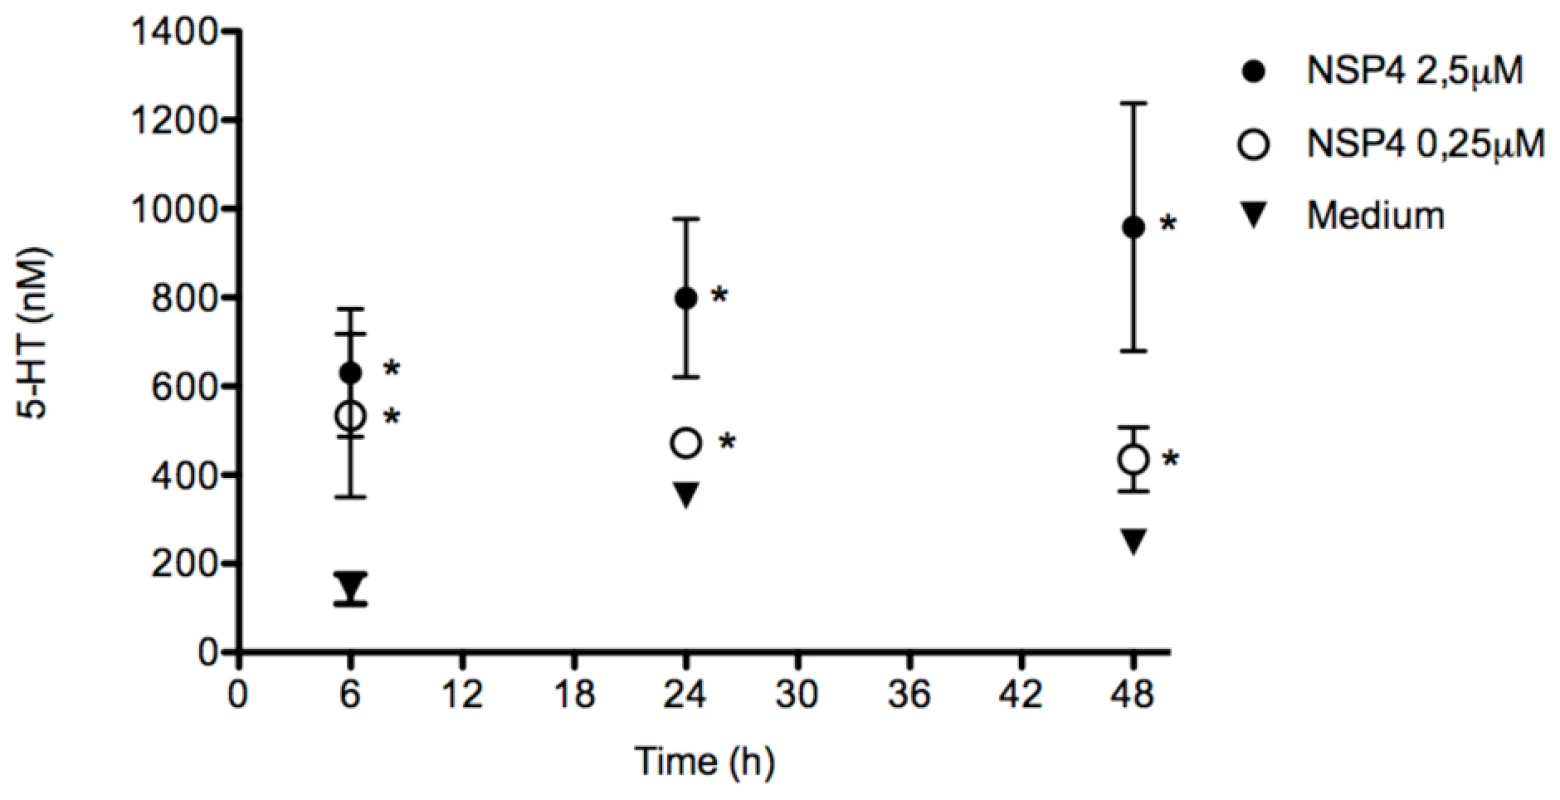 NSP4 induces 5-HT release in a dose- and time-dependent manner.